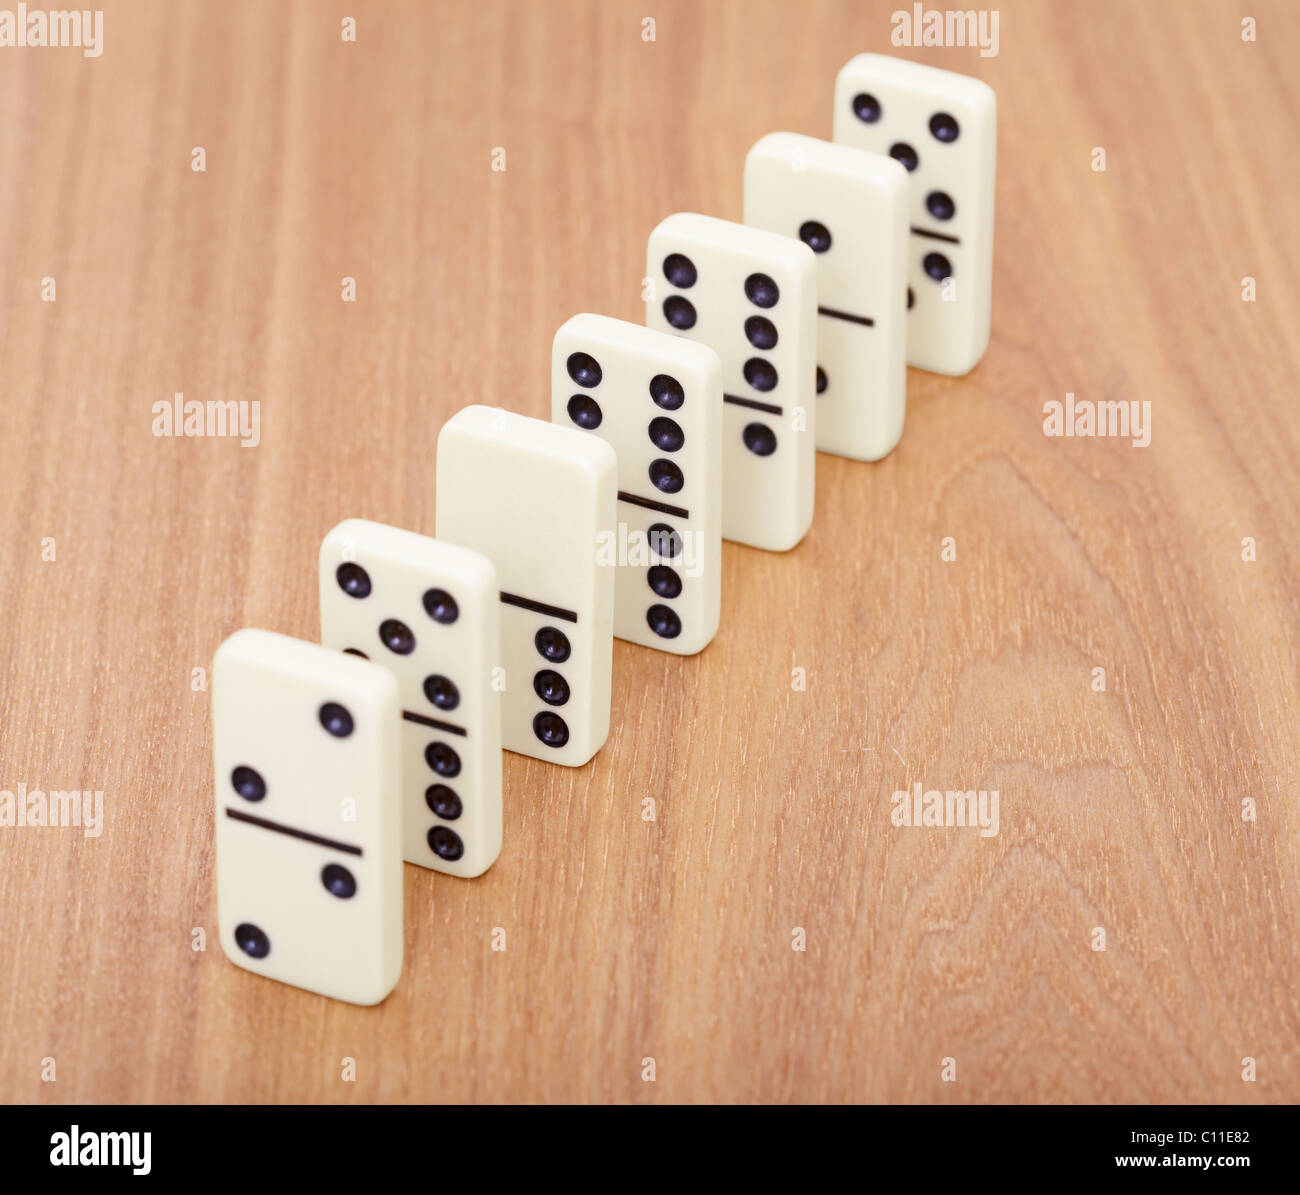 A line from dominoes Stock Photo